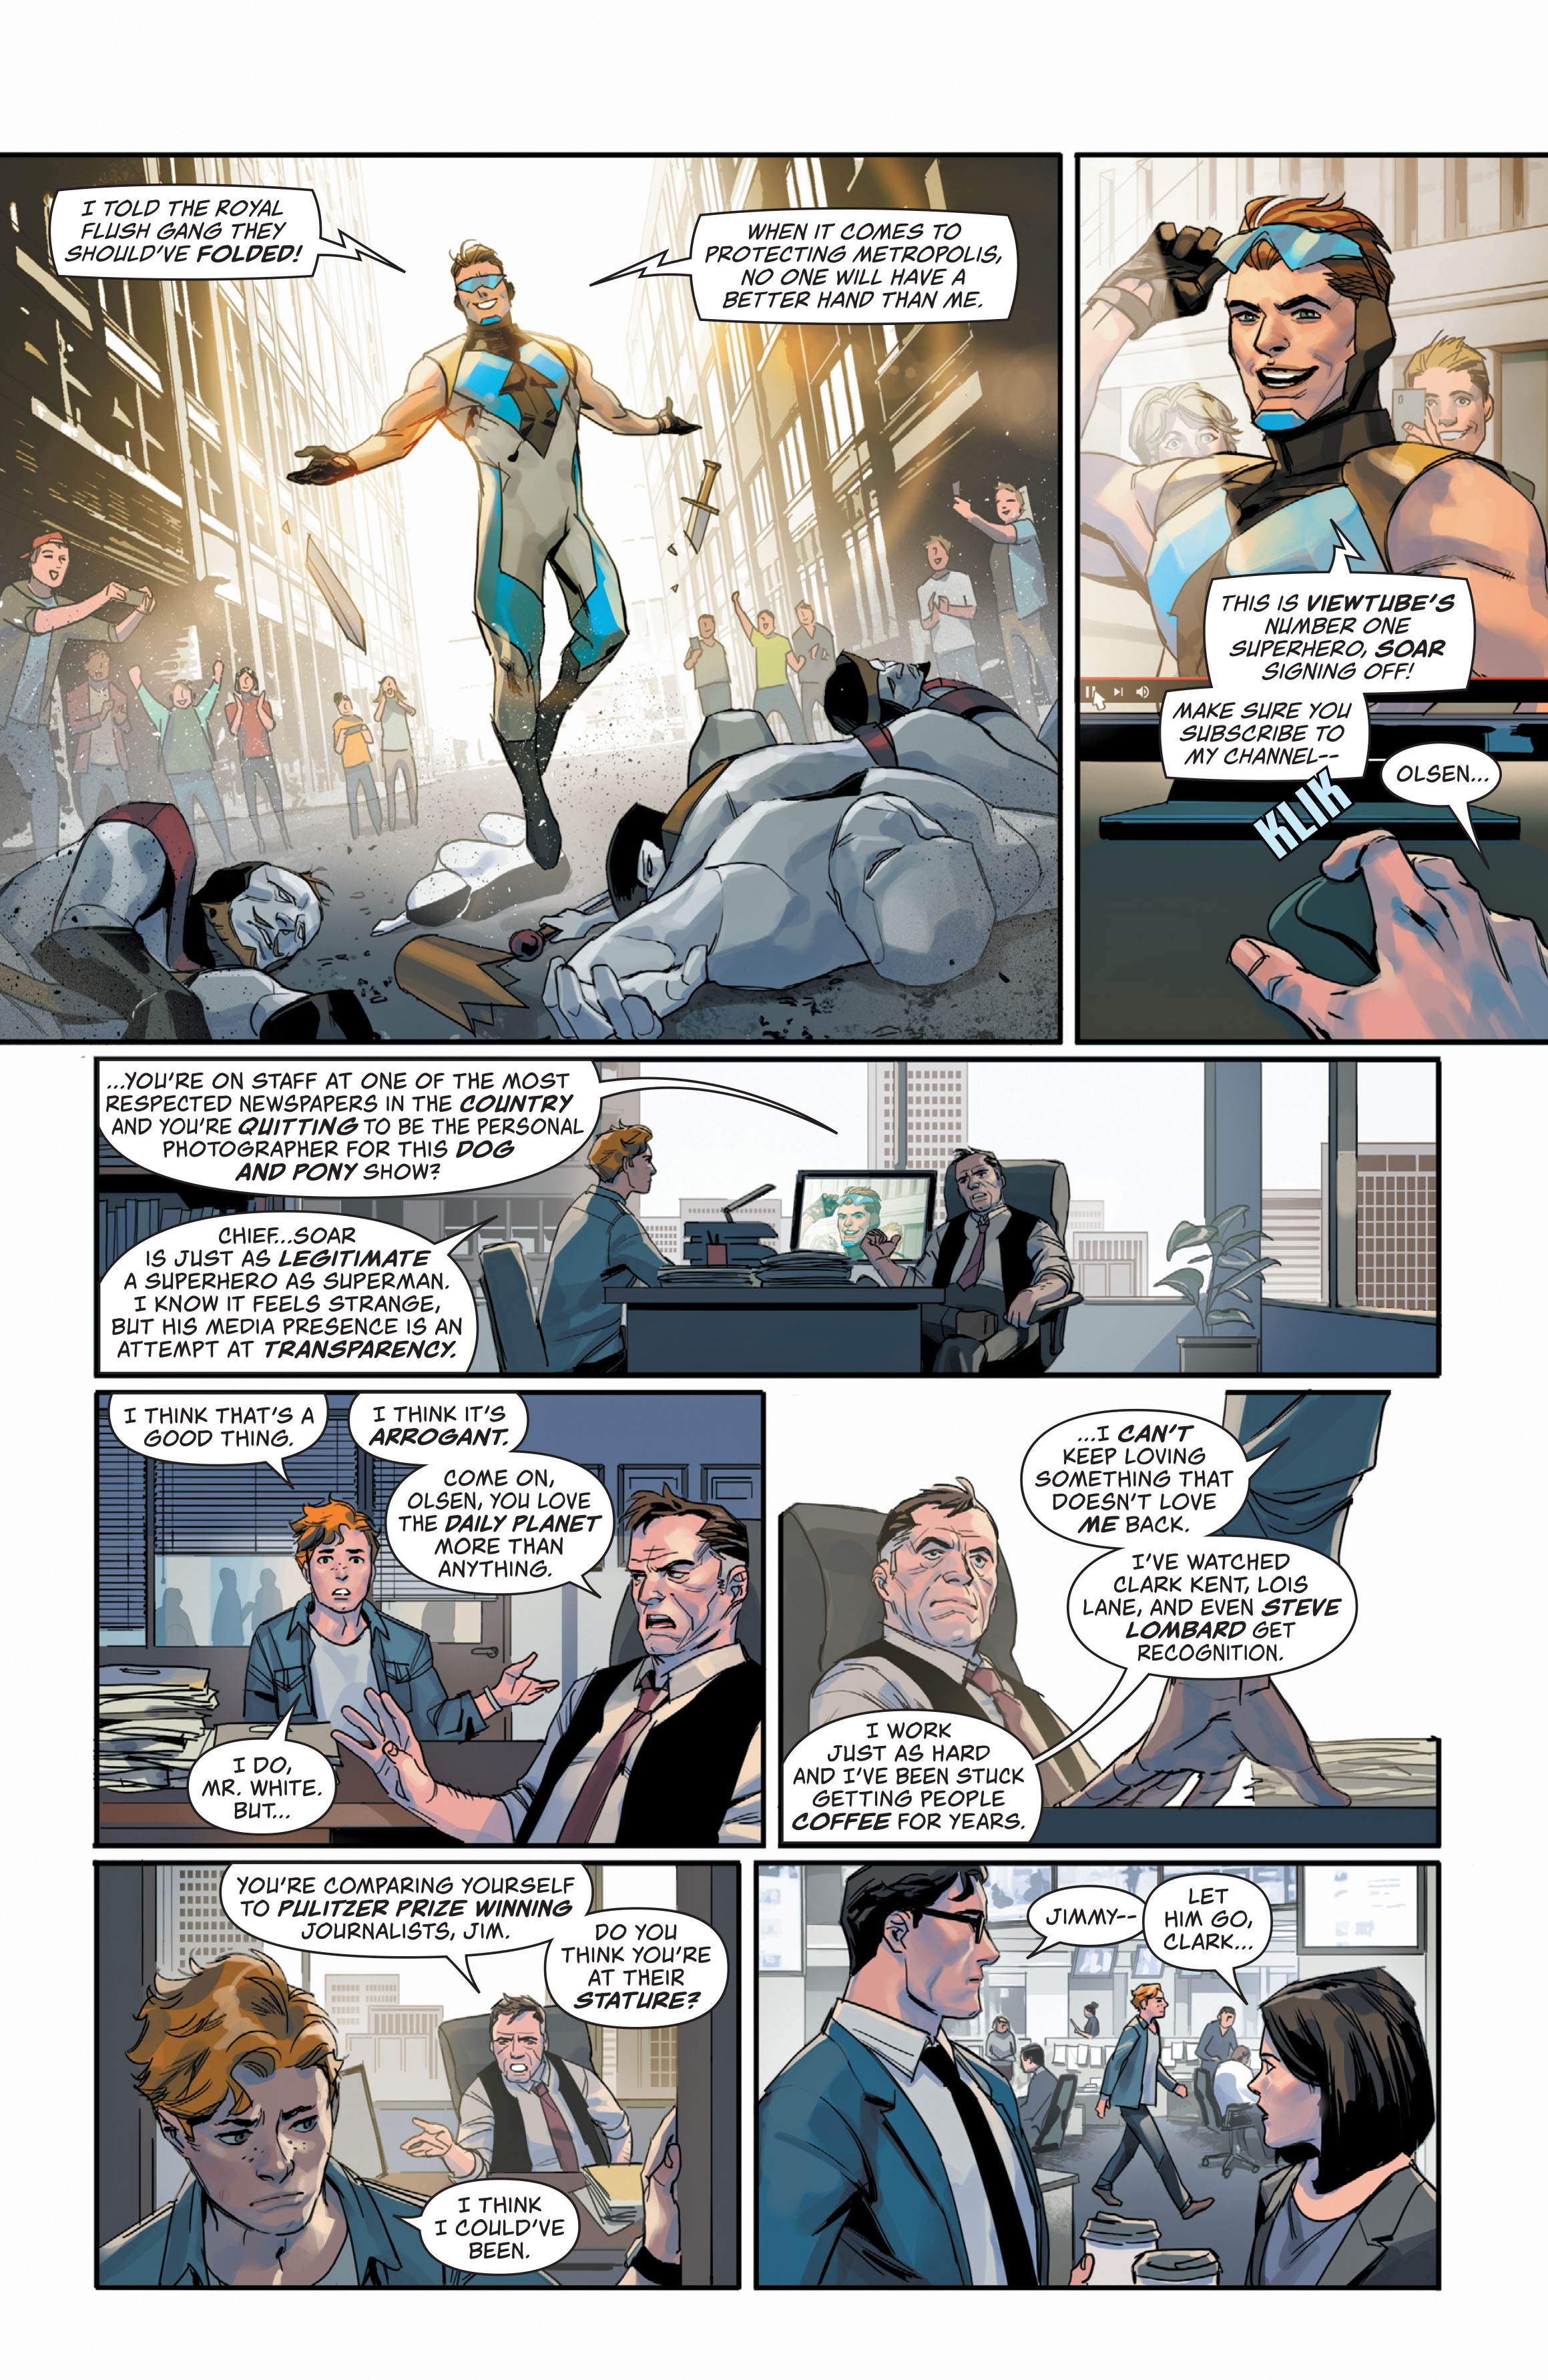 Superman: Man of Tomorrow (2020-): Chapter 7 - Page 2